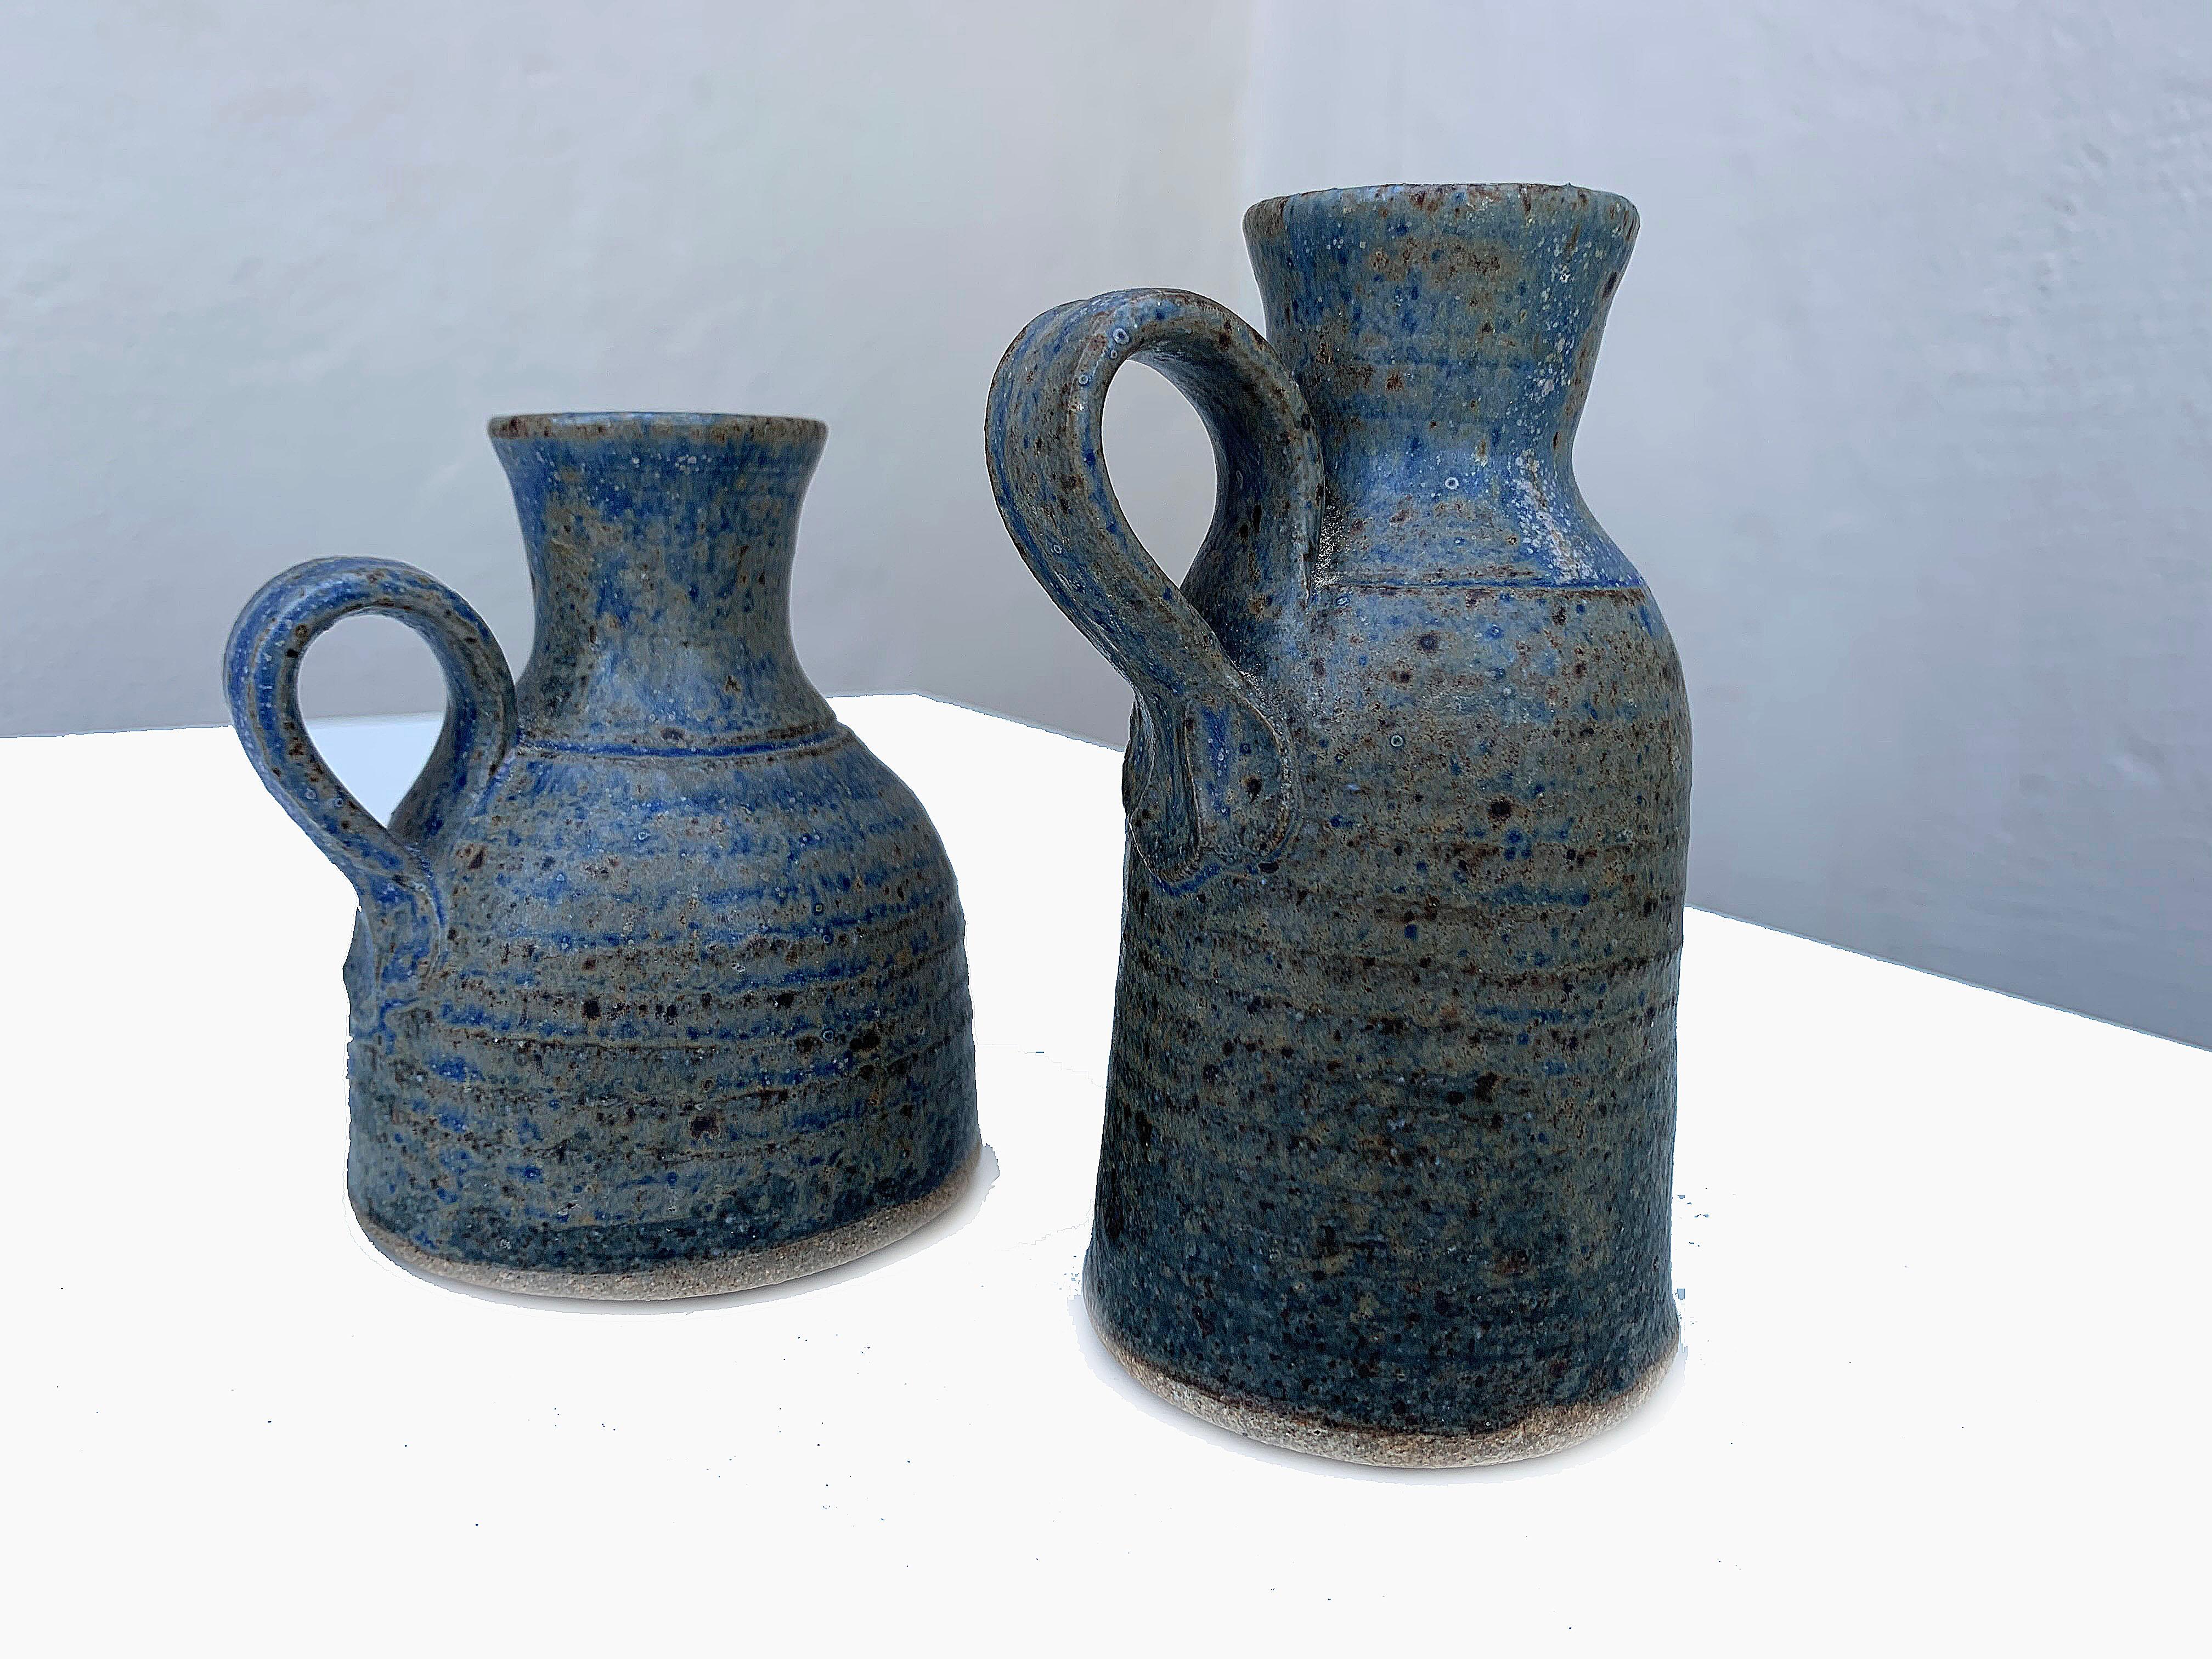 Fired Pair of Small Blue Ceramic Decanters